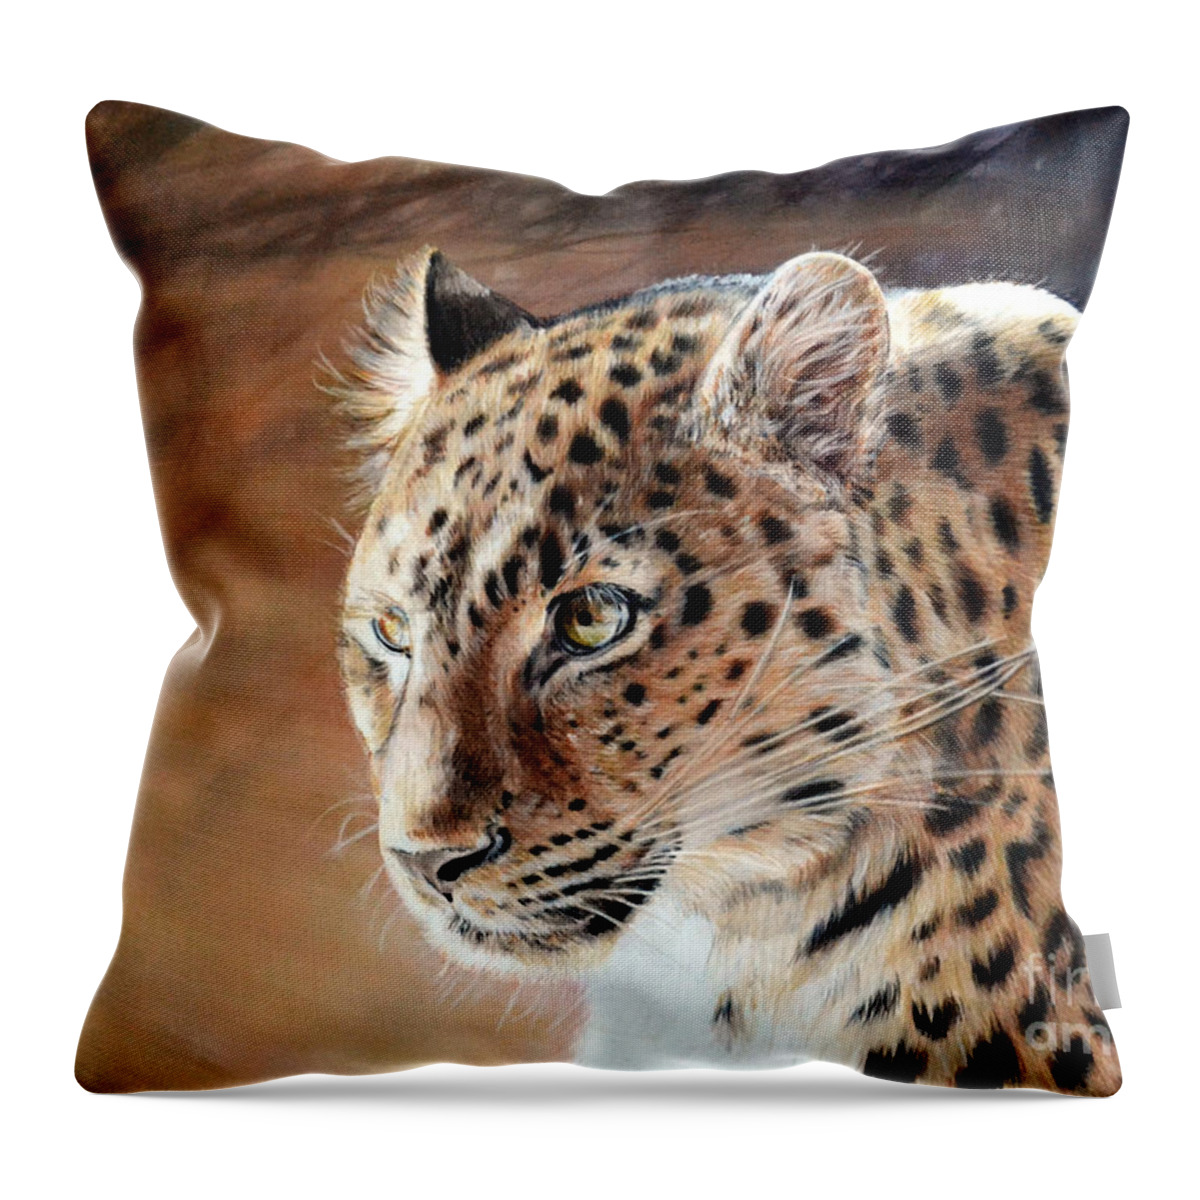 Leopard Throw Pillow featuring the painting The Haunting by Lachri